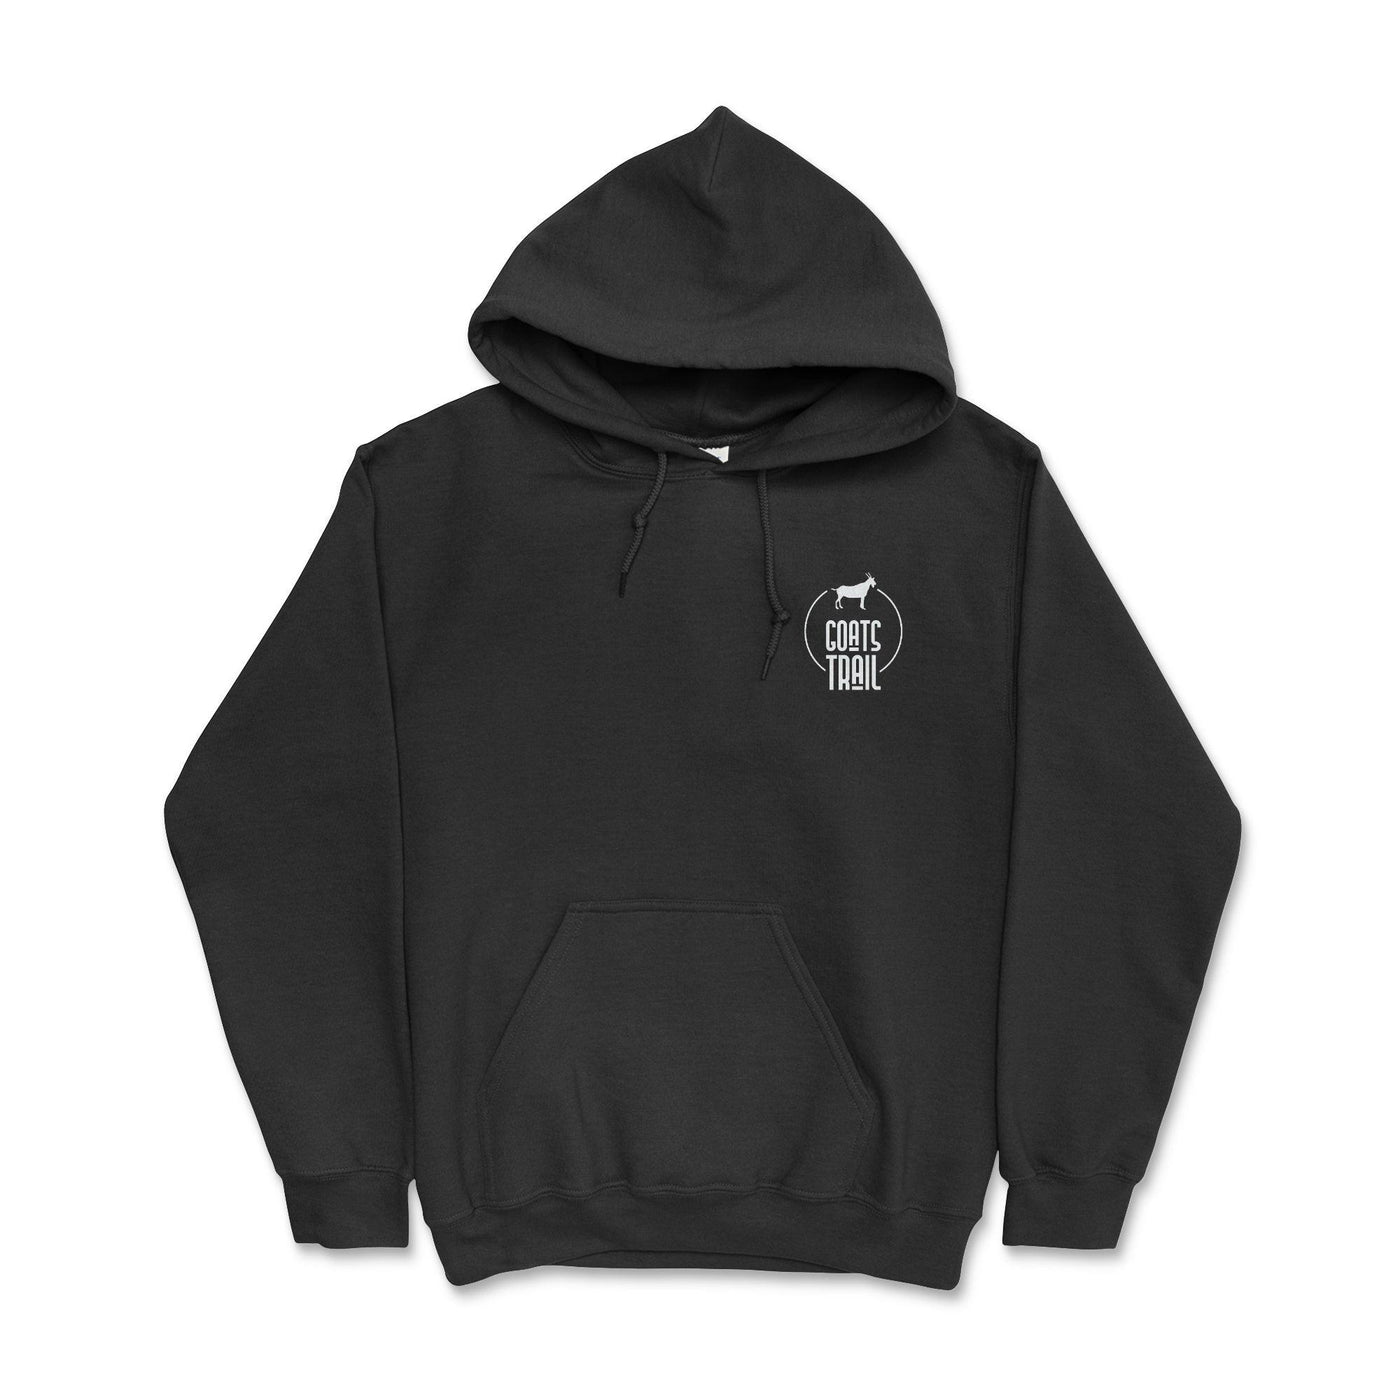 Bronco Buckle Up Buttercup Hoodie - Goats Trail